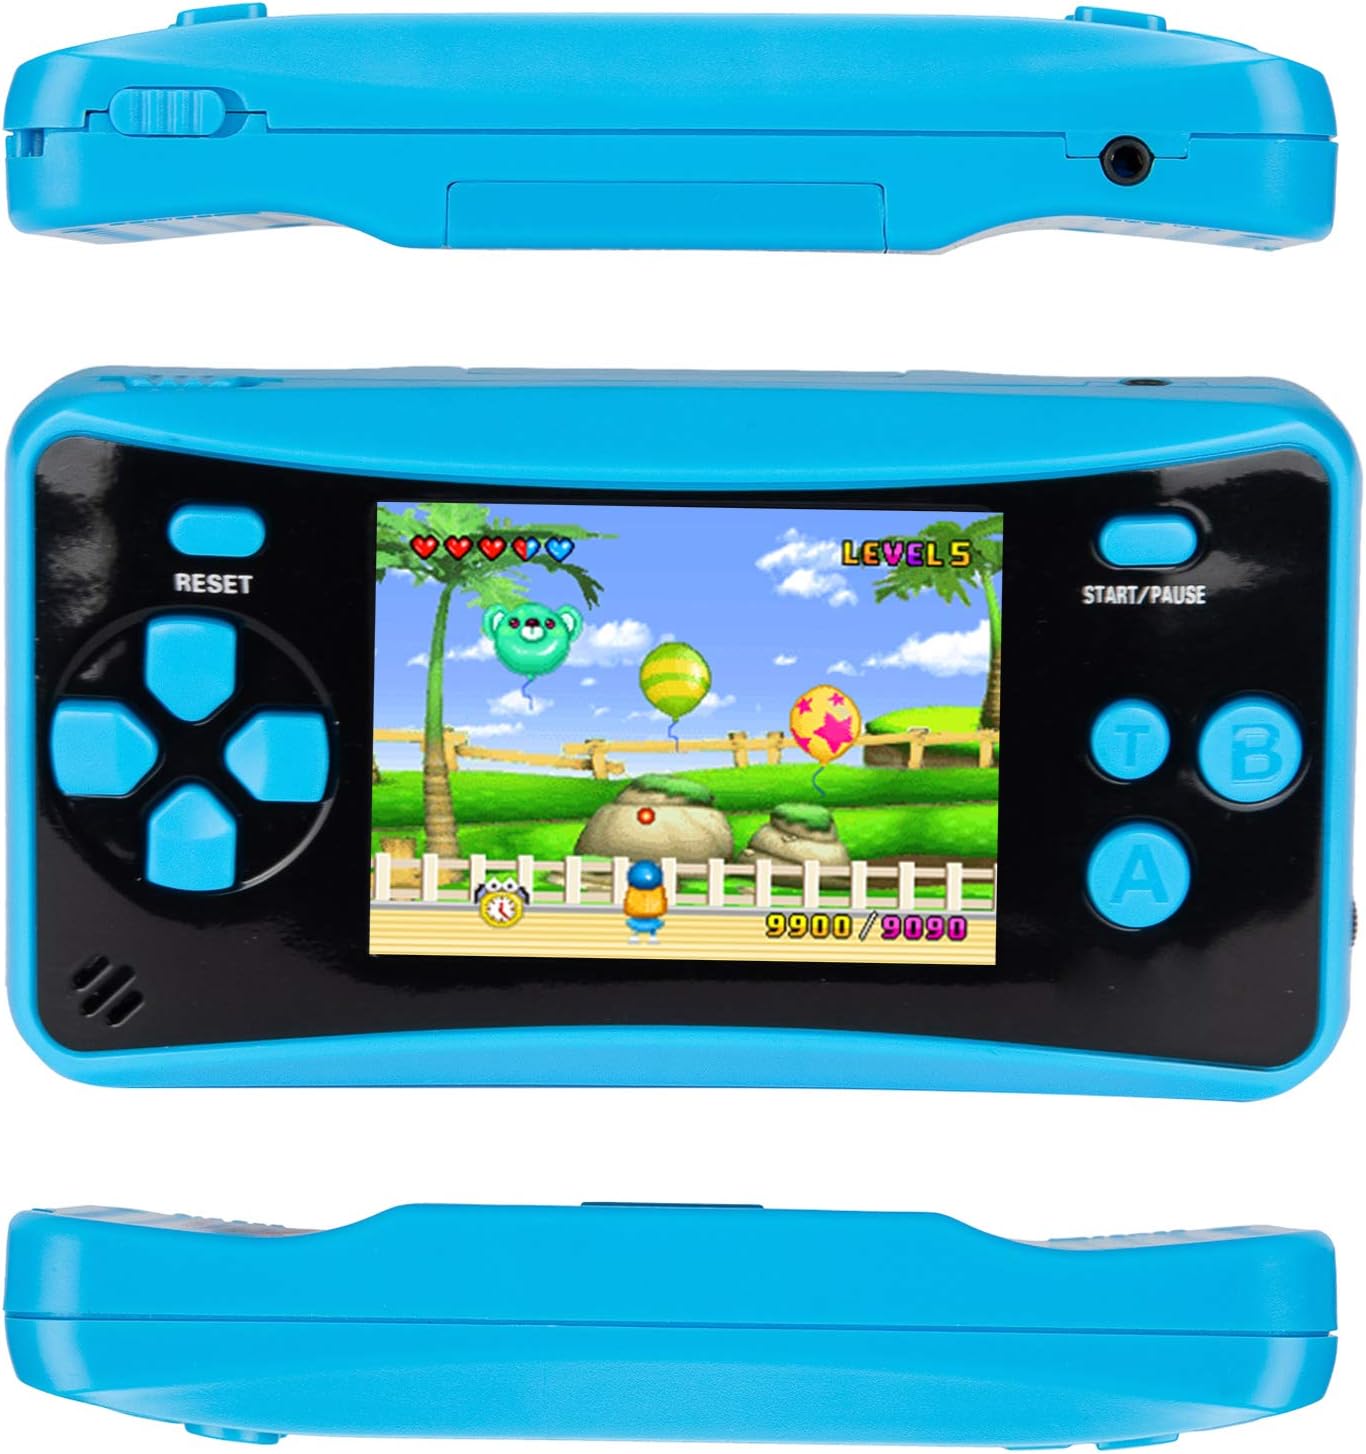 HigoKids Handheld Game for Kids Portable Retro Video Game Player Built-in 182 Classic Games 2.5 inches LCD Screen Family Recreation Arcade Gaming System Birthday Present for Children-Green